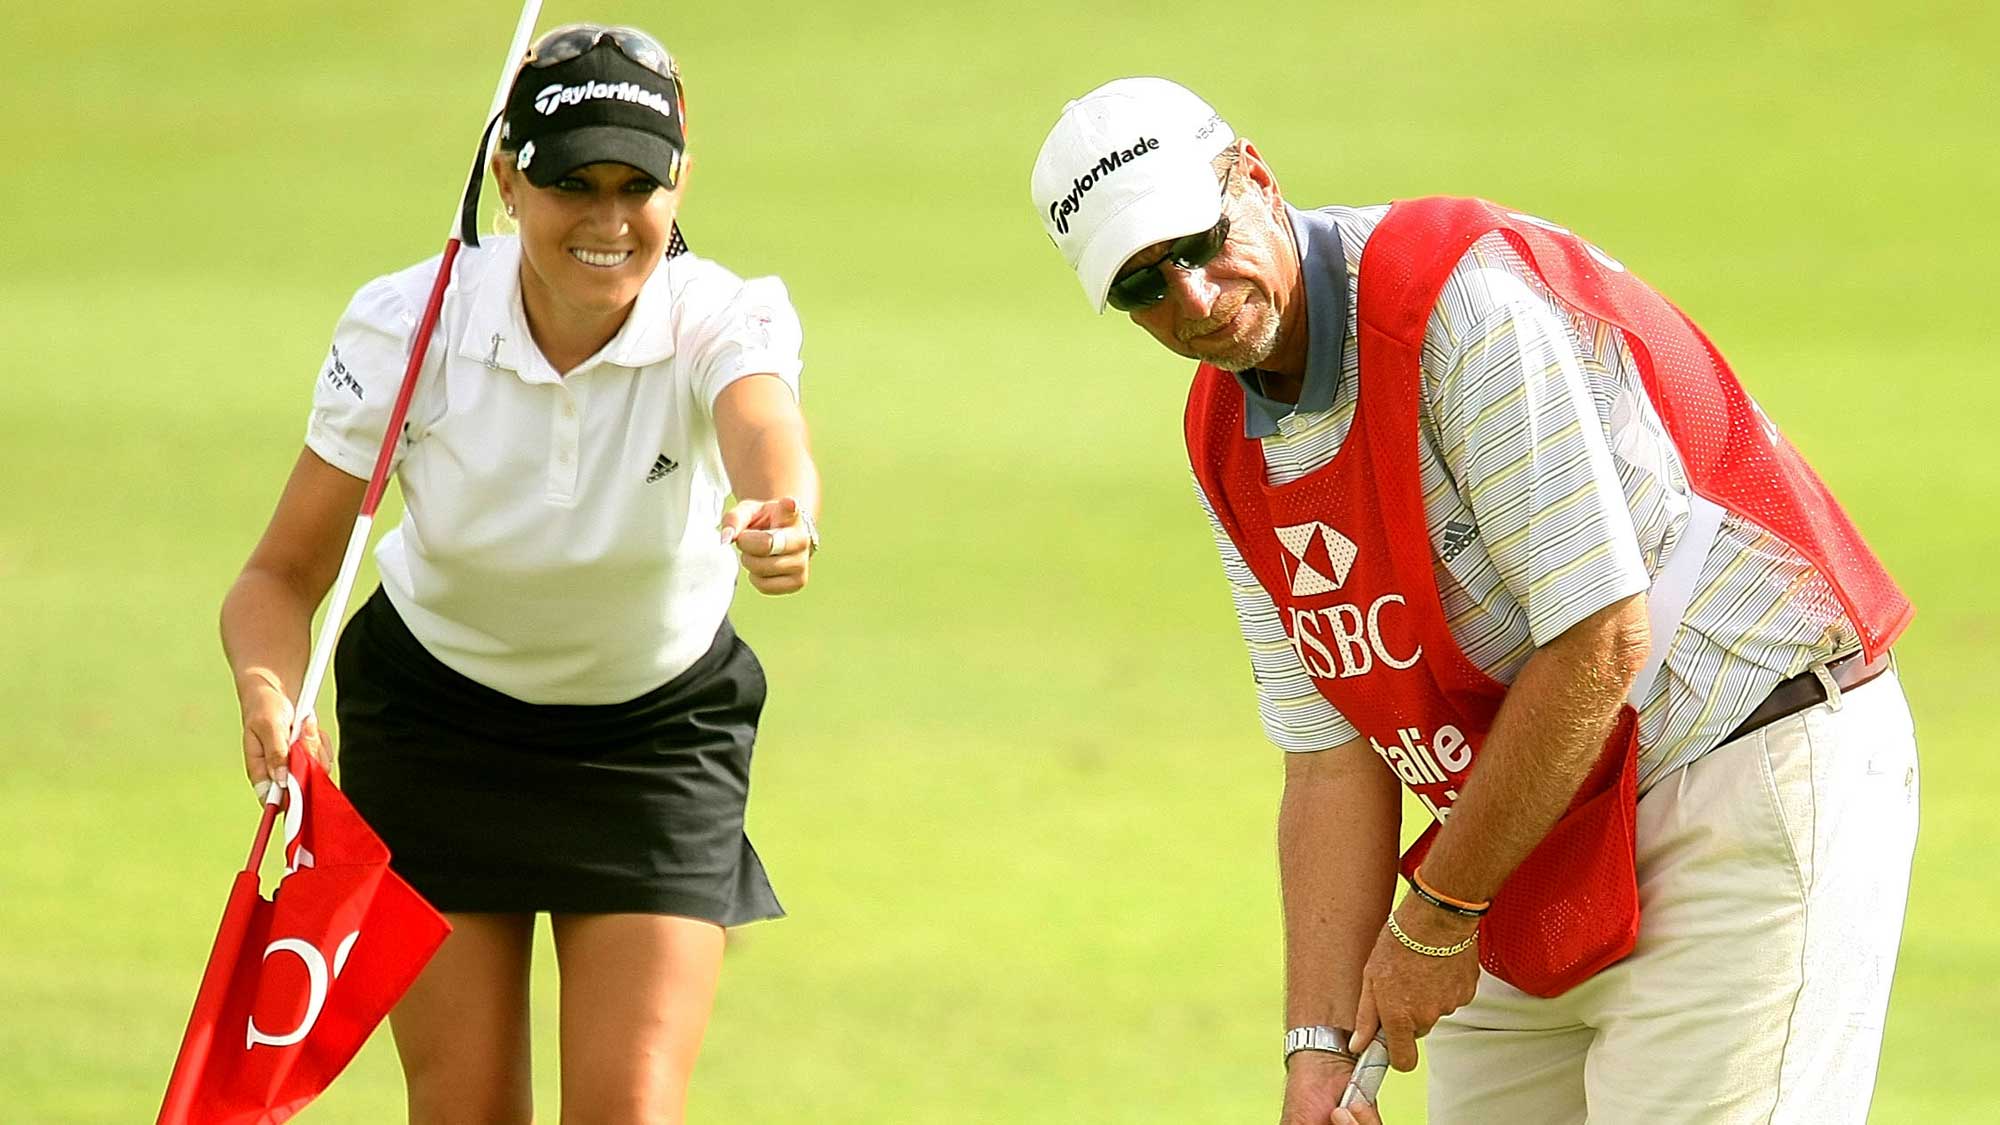 Natalie Gulbis of the USA lines up her caddie Greg Sheridan during the pro-am prior to the start of the HSBC Women's Champions at Tanah Merah Country Club on February 27, 2008 in Singapore.